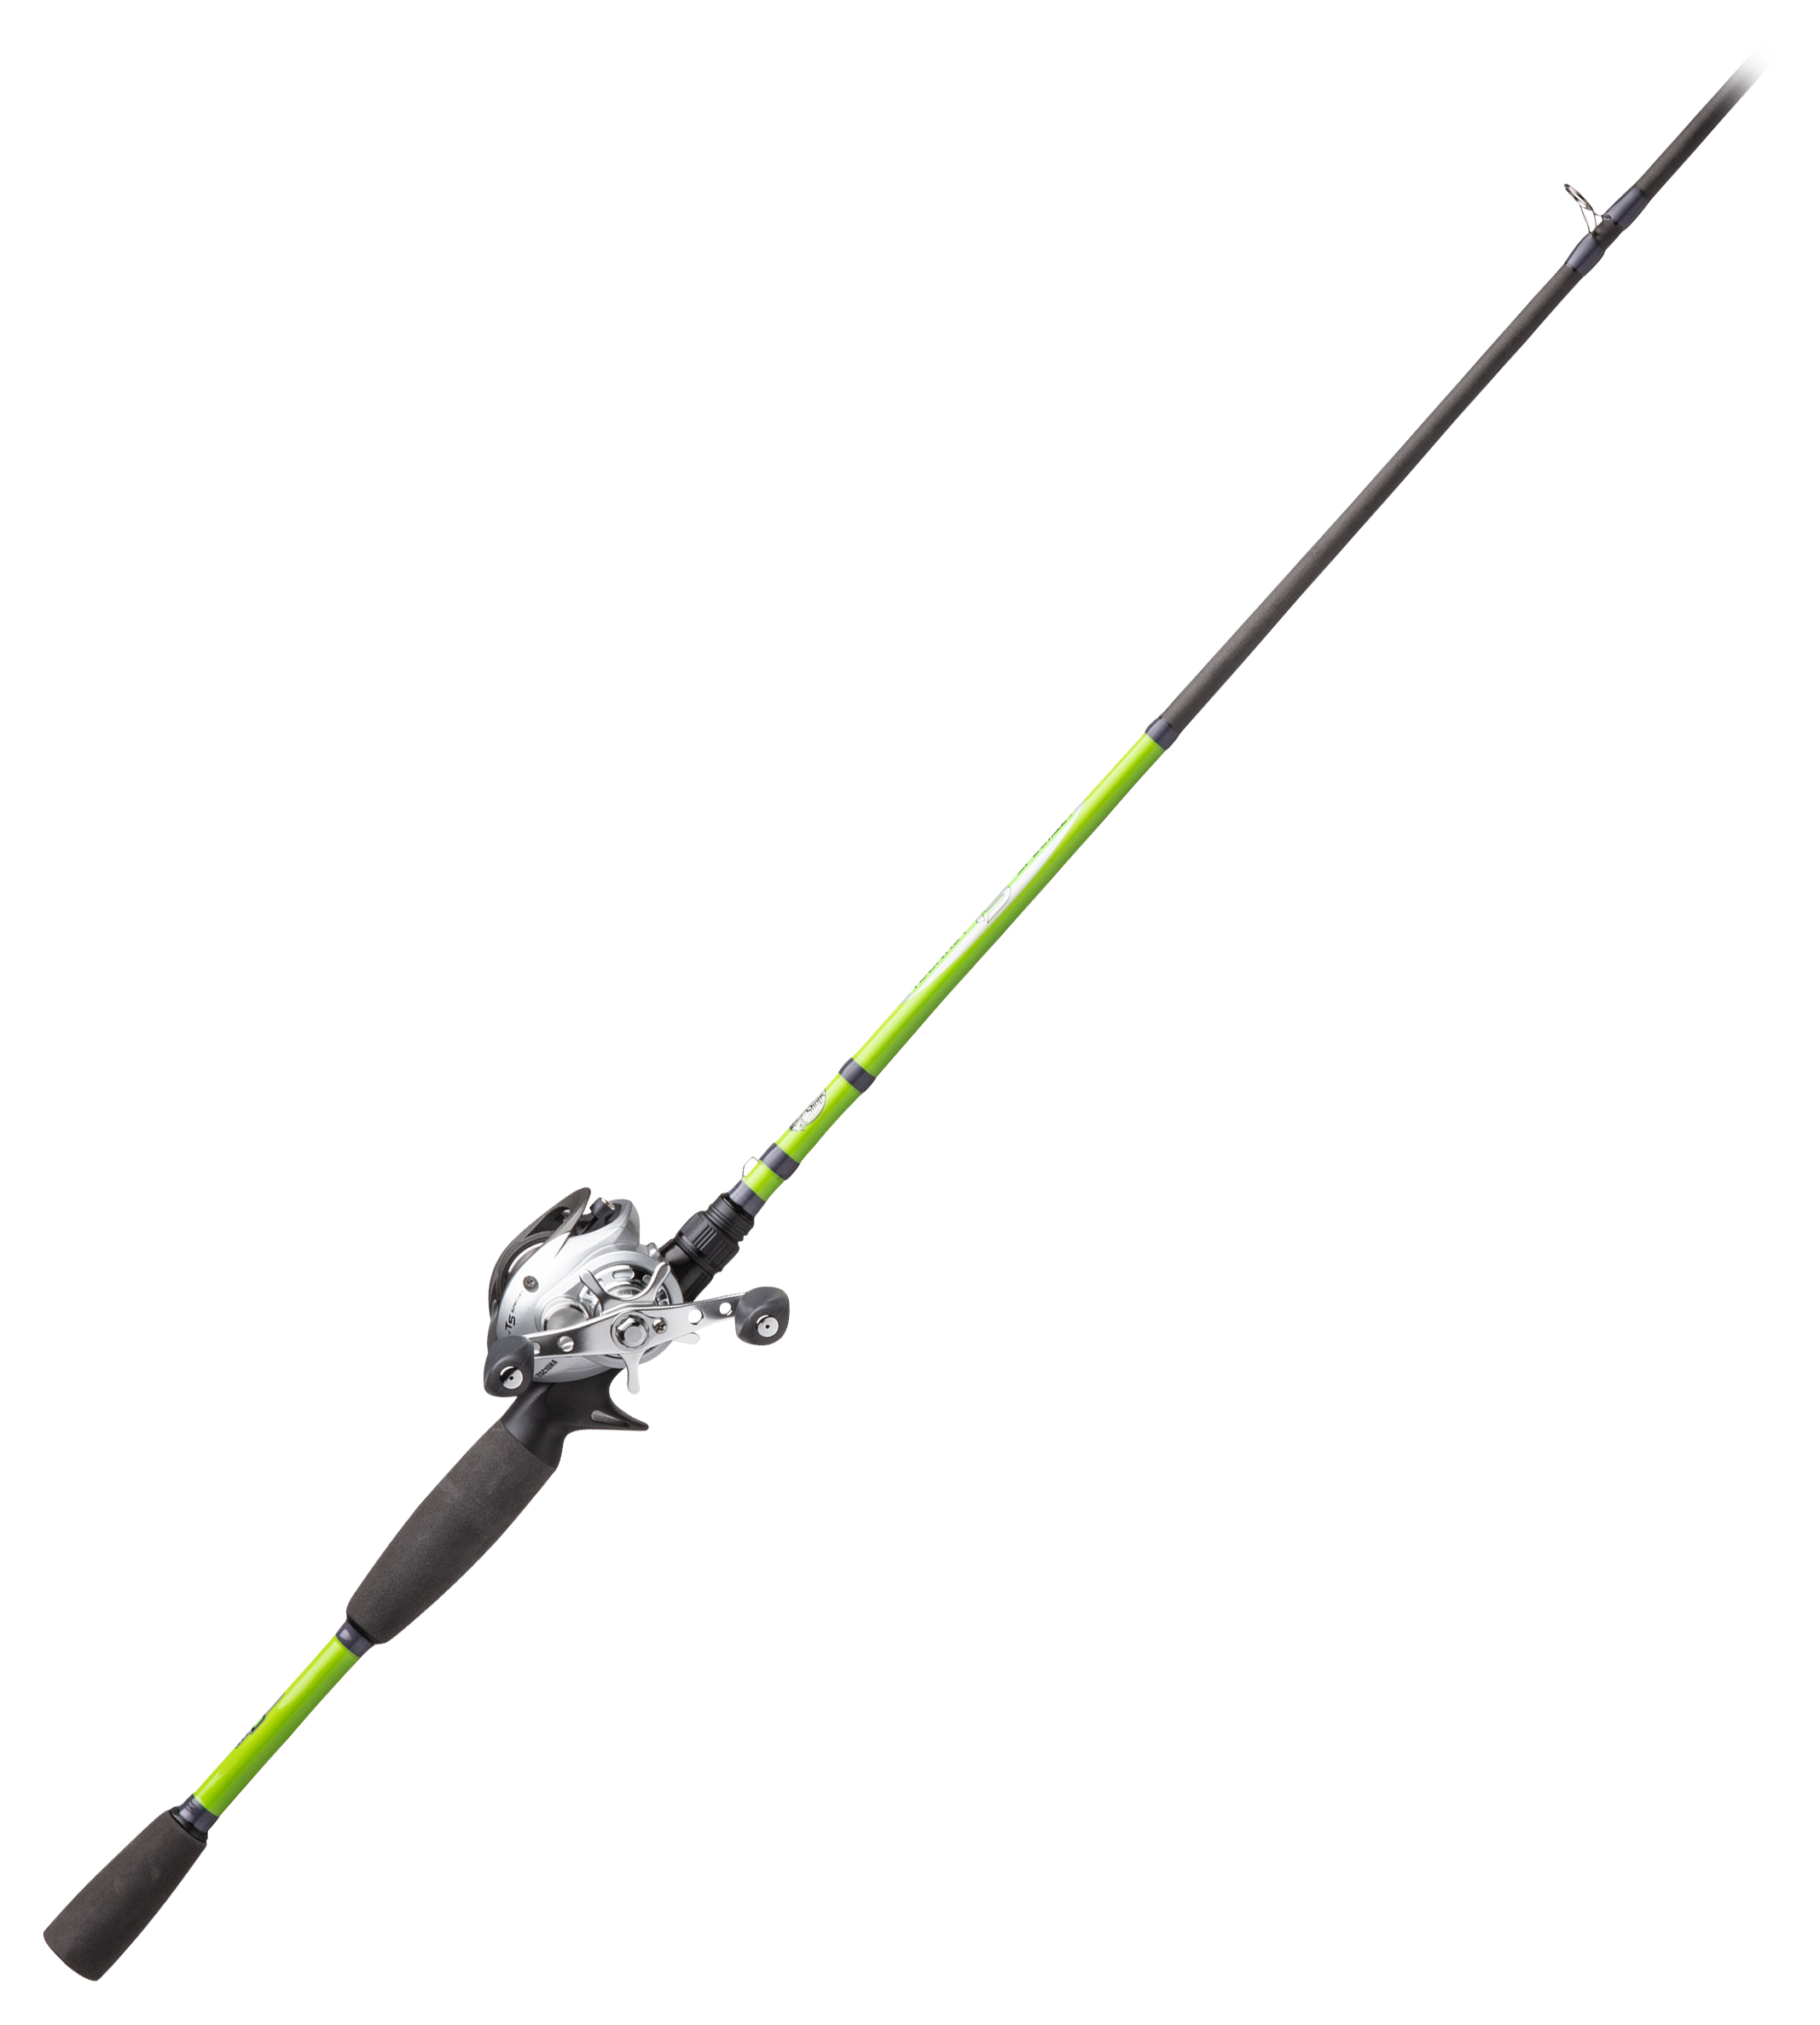 Bass Pro Shops Tourney Special Baitcast Rod and Reel Combo - Right - 7' - Medium